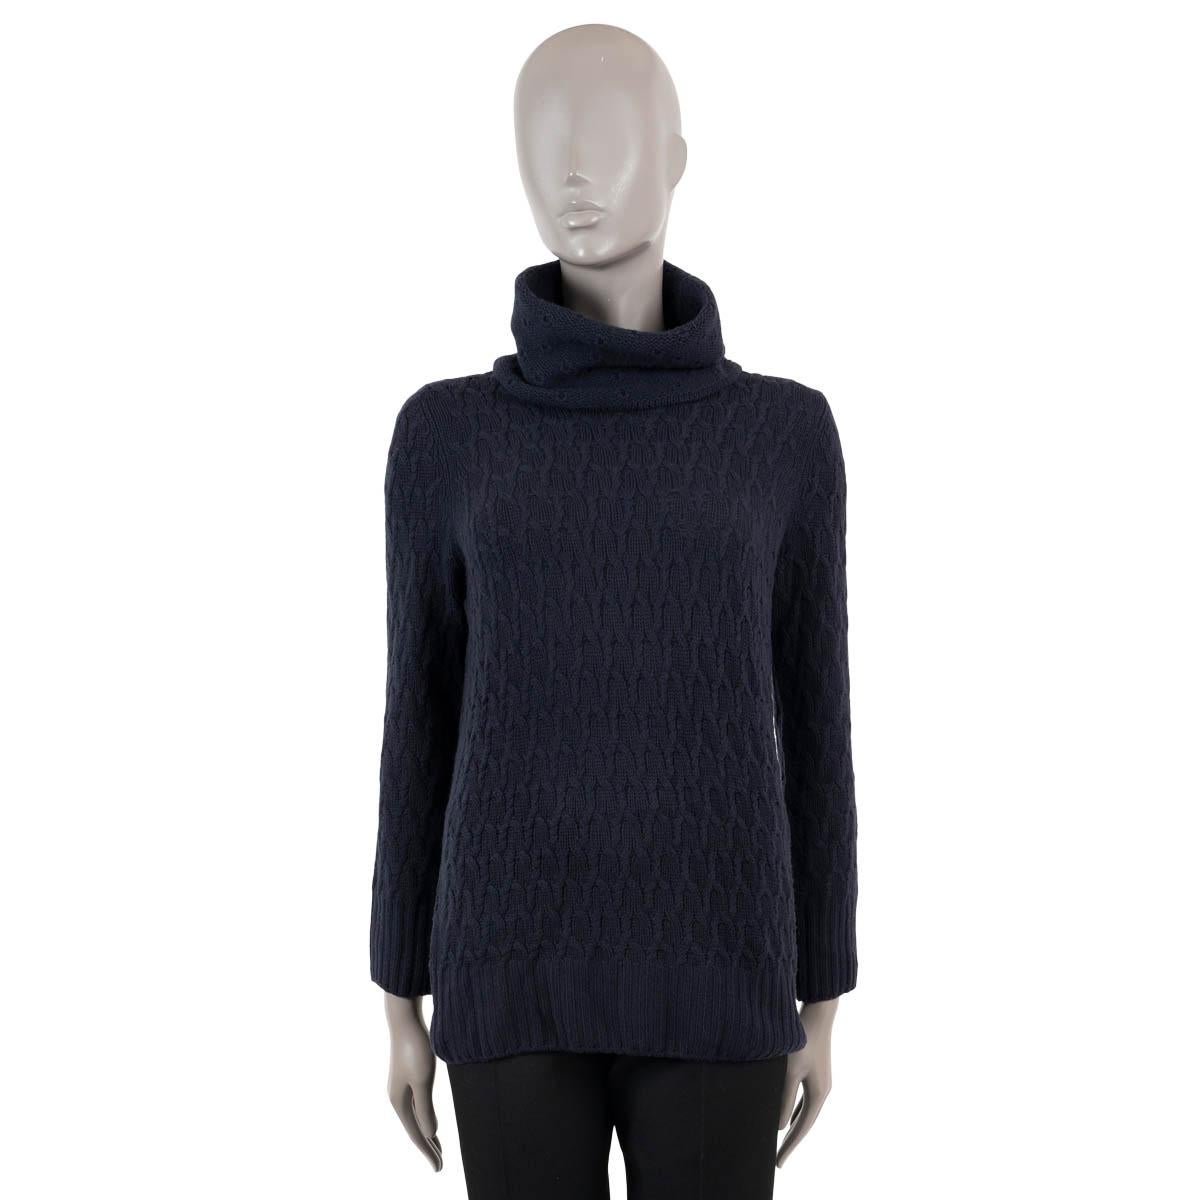 LORO PIANA navy blue VICUNA CABLE KNIT TURTLENECK Sweater 40 S